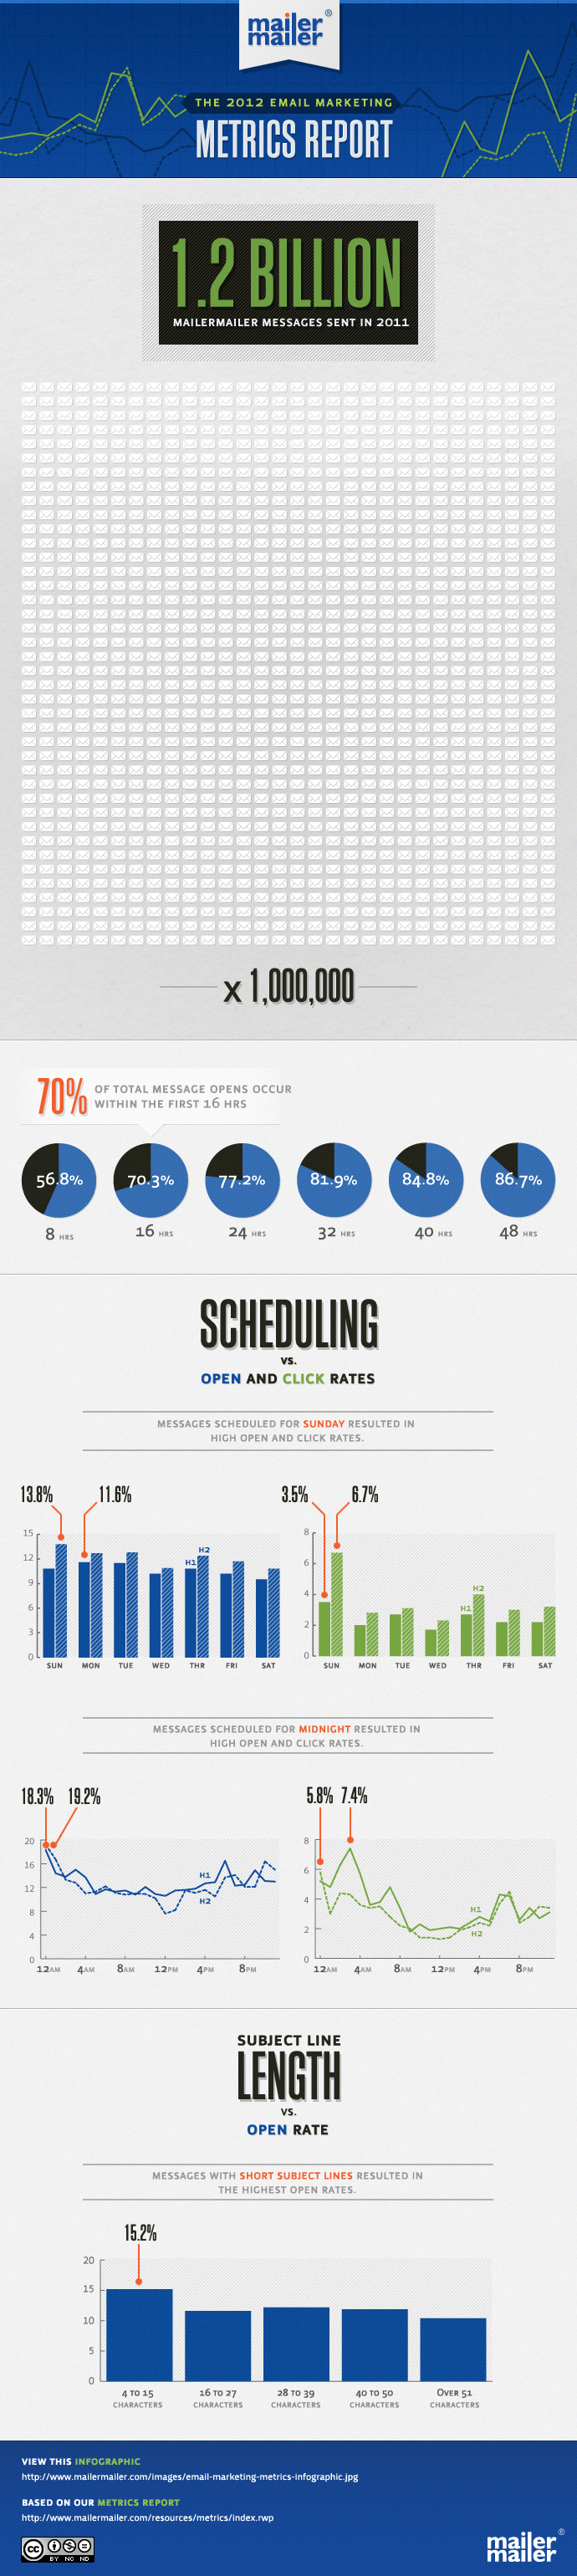 current-state-of-email-marketing-infographic_5033b1763b59d